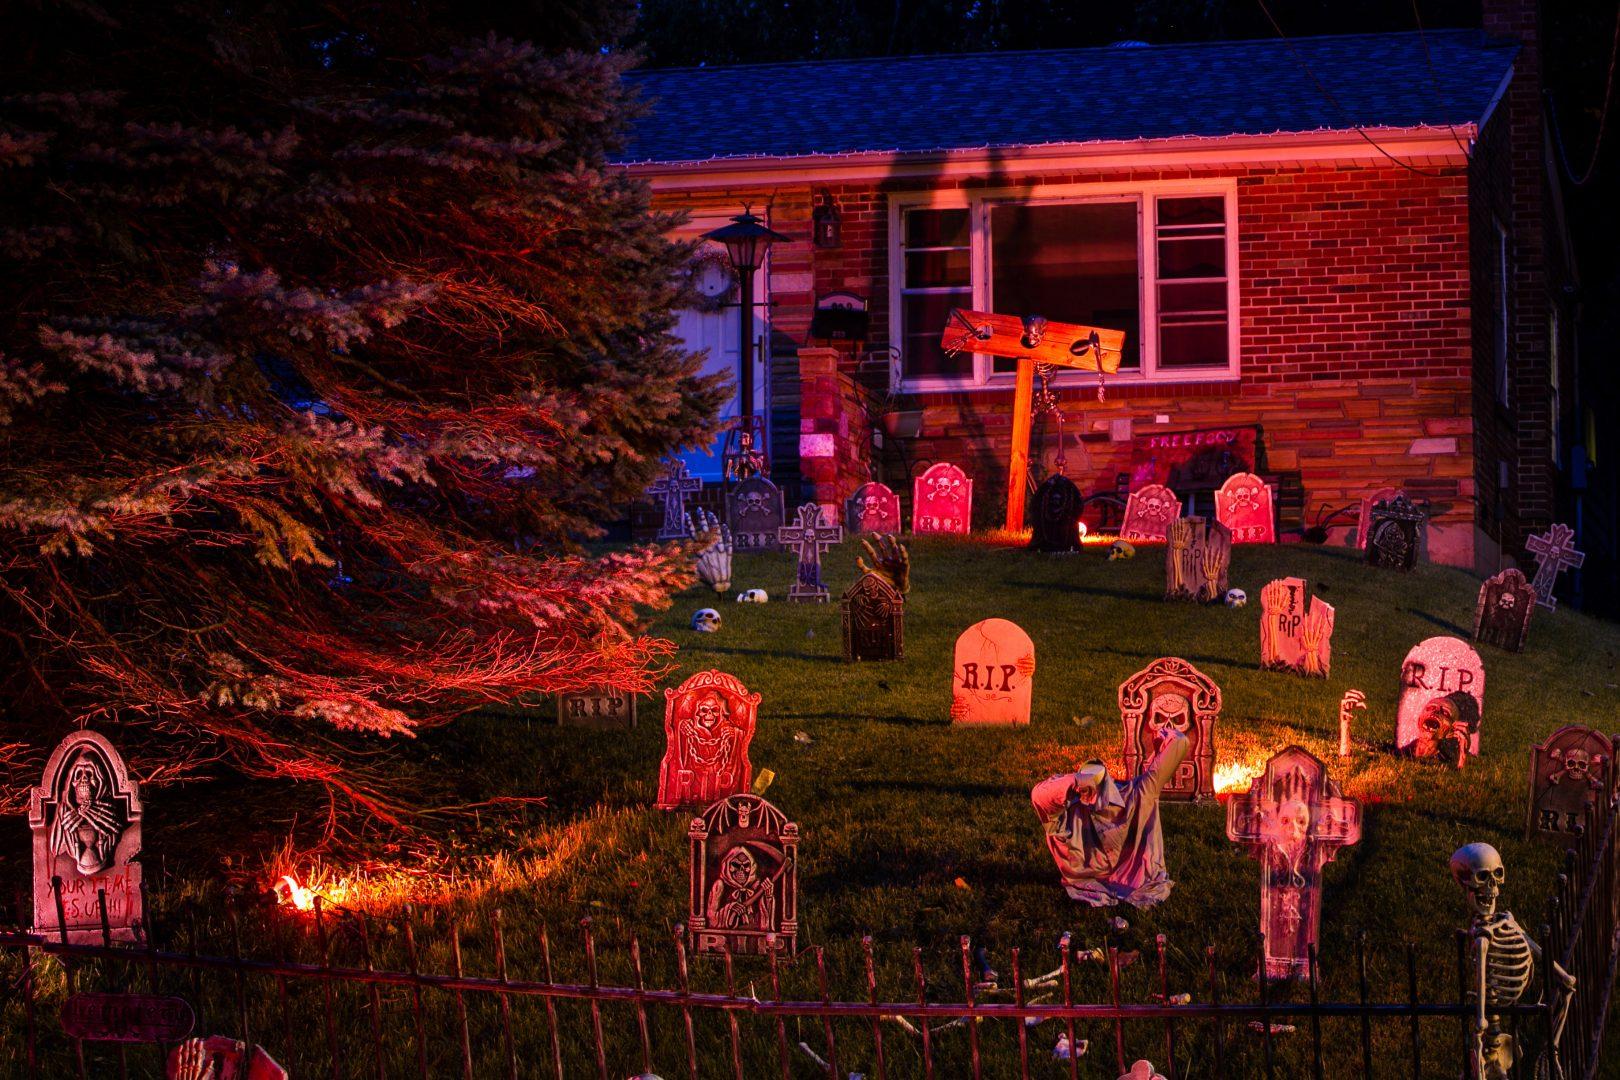 Erik M. Lunsford ”¢ St. Louis Post-Dispatch / Tribune News Service
Tim and Katie Mulhall go all out with Halloween decorations at their home in St. Louis, Missouri. 